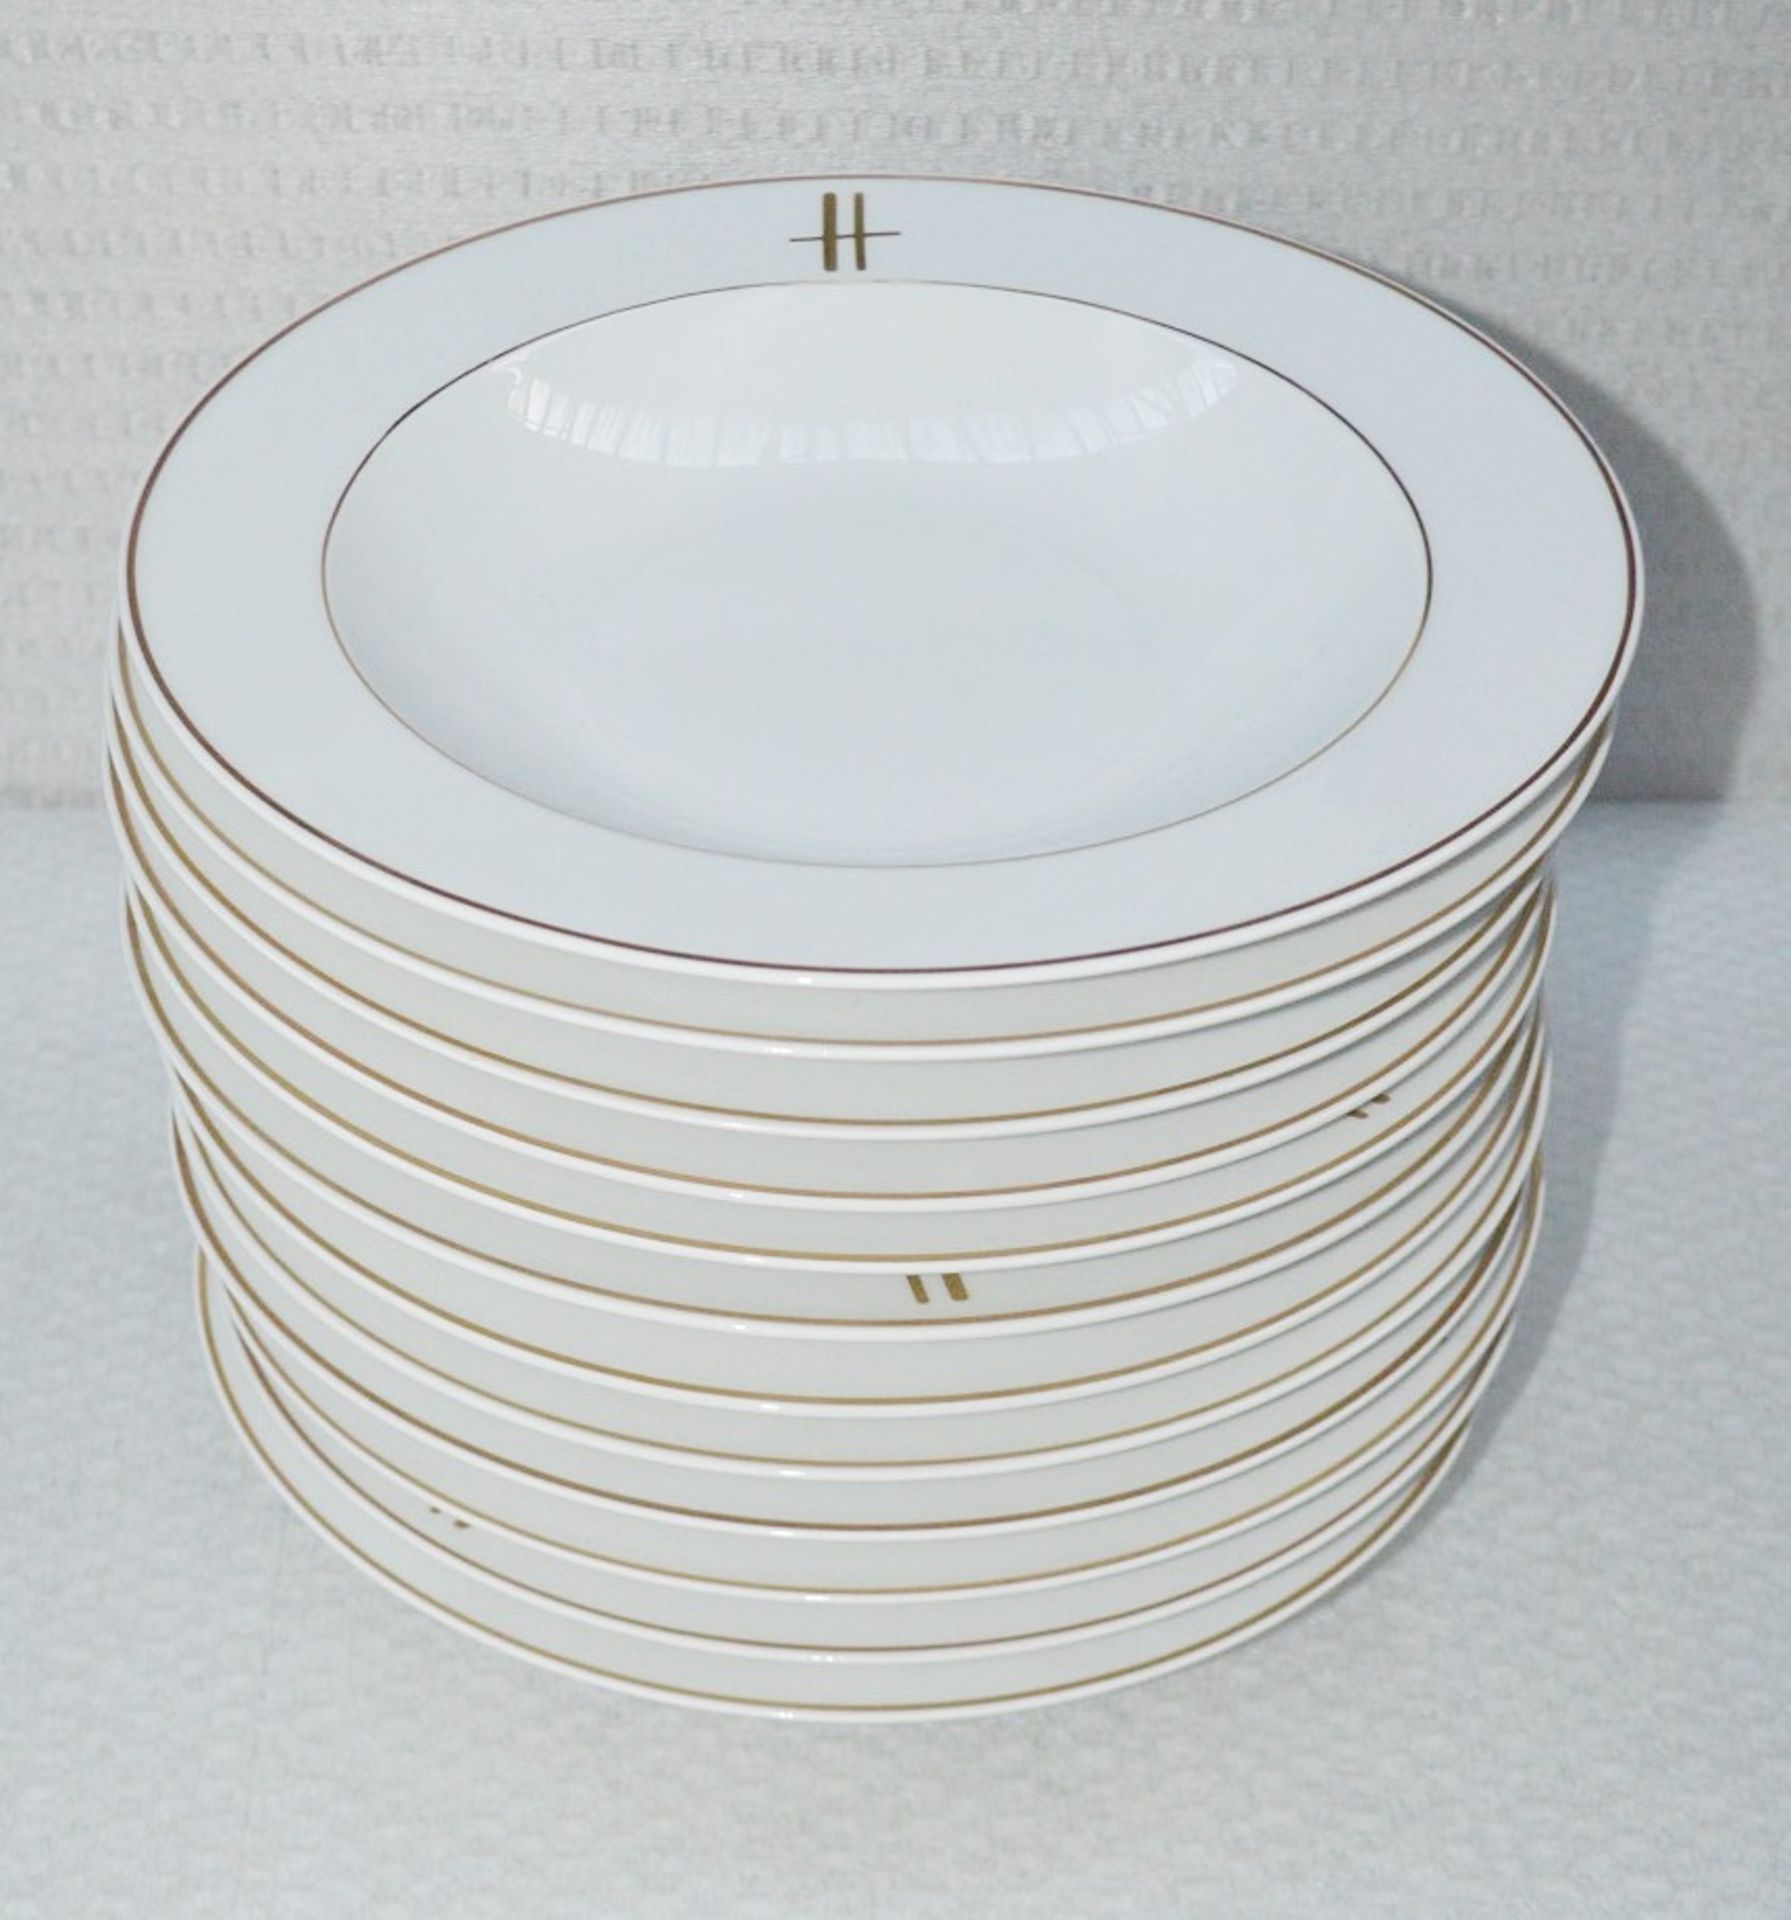 32 x PILLIVUYT Porcelain Pasta / Soup Plates In White Featuring 'Famous Branding' In Gold -